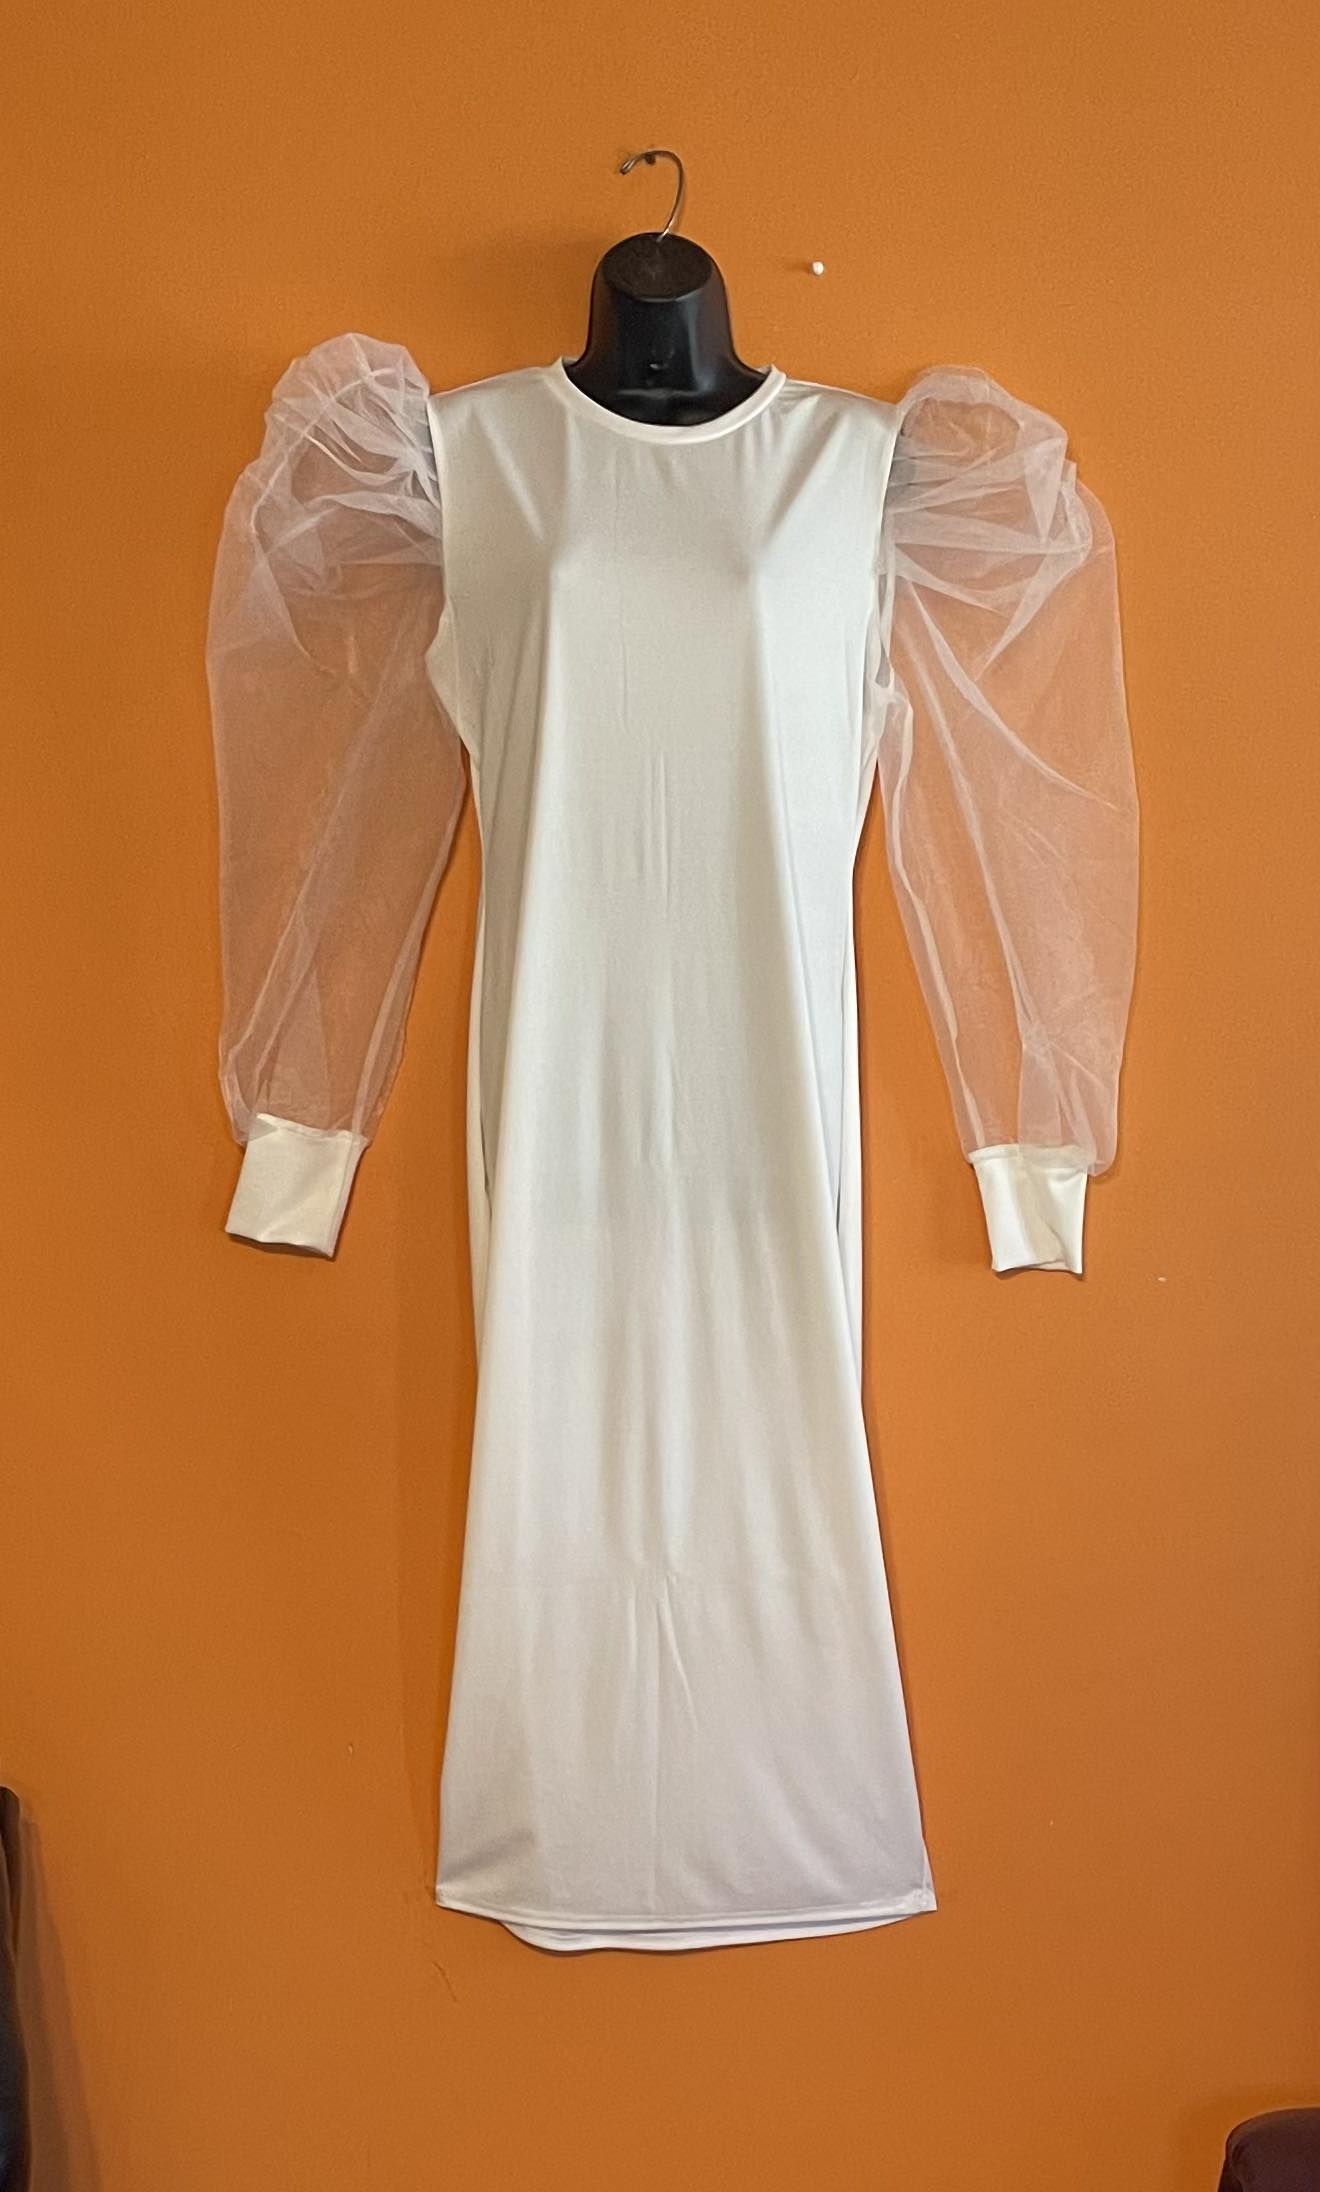 White Dress with Sheer Sleeves - Small